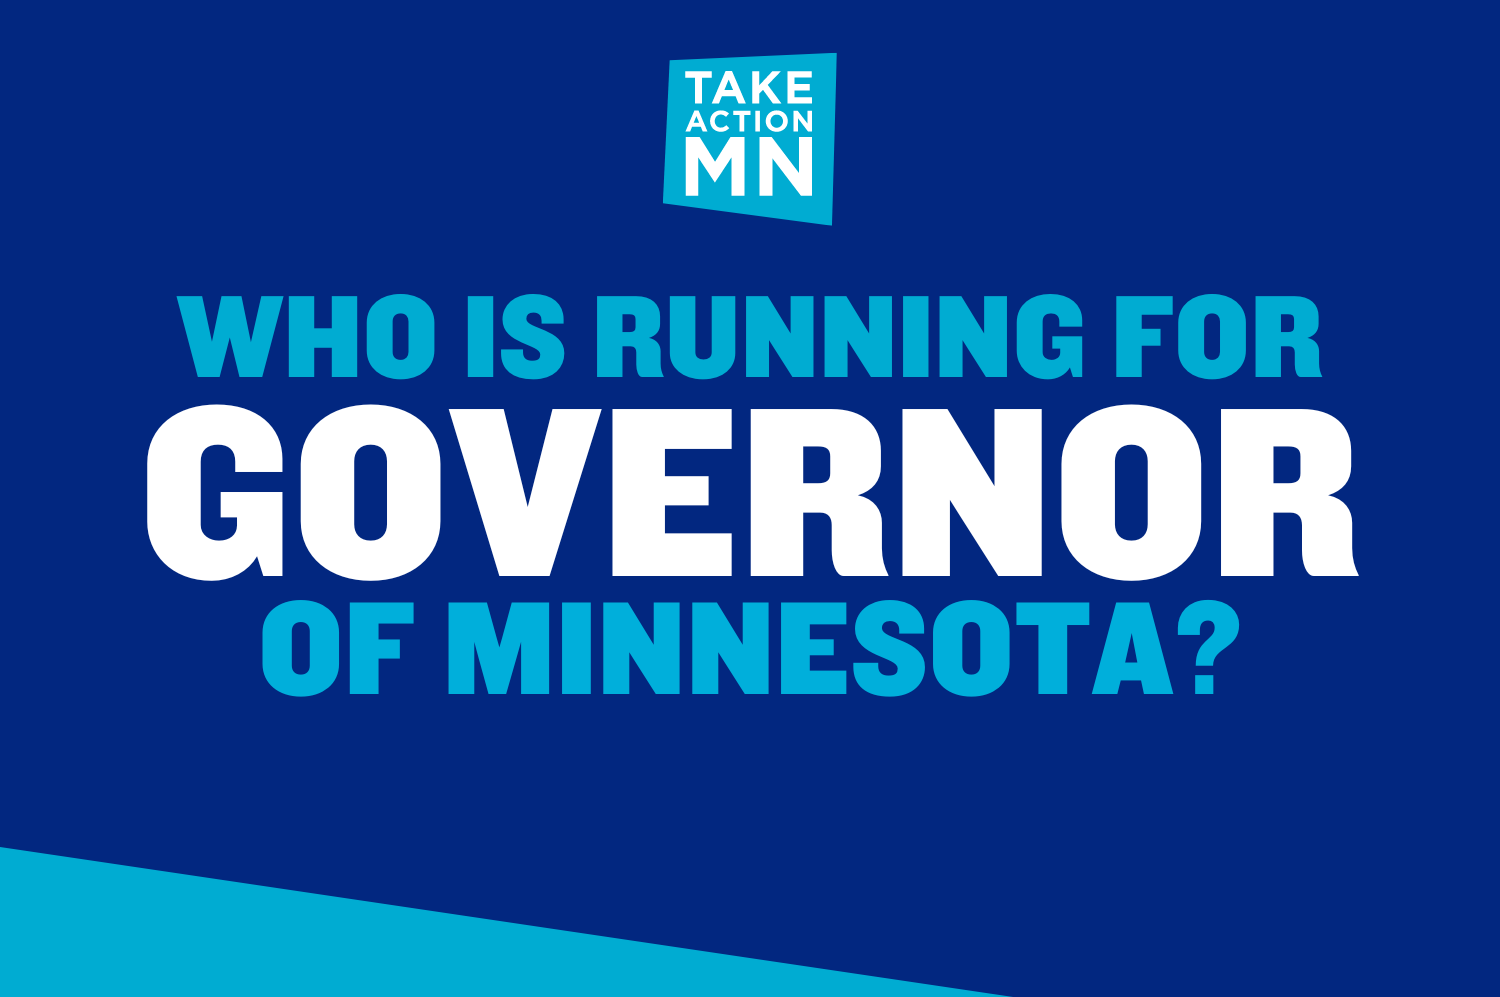 Light blue and white text on dark blue background: "Who is running for governor of Minnesota?" with the TakeAction Minnesota logo